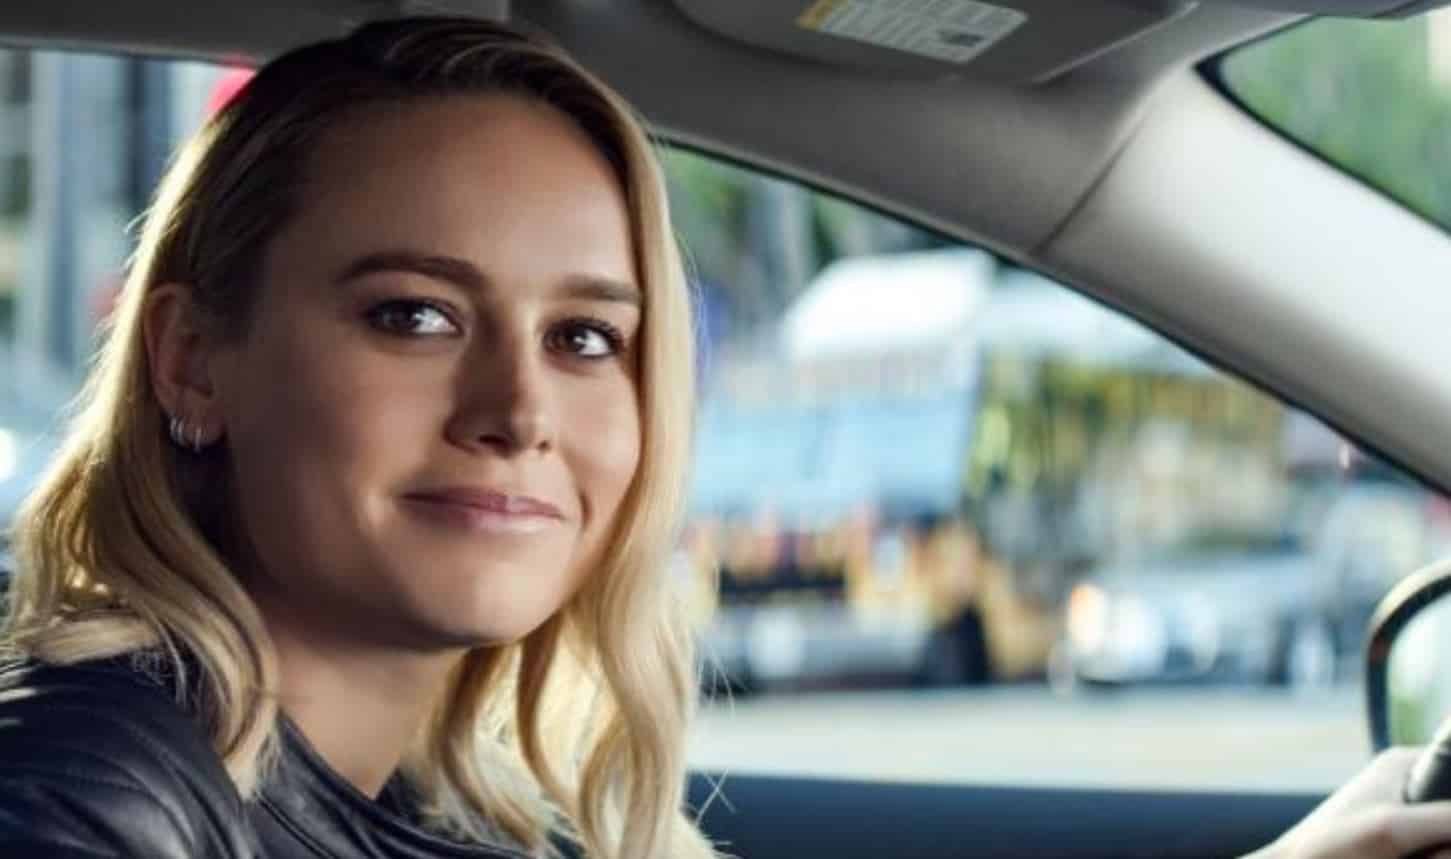 Is Brie Larson in a Nissan commercial?